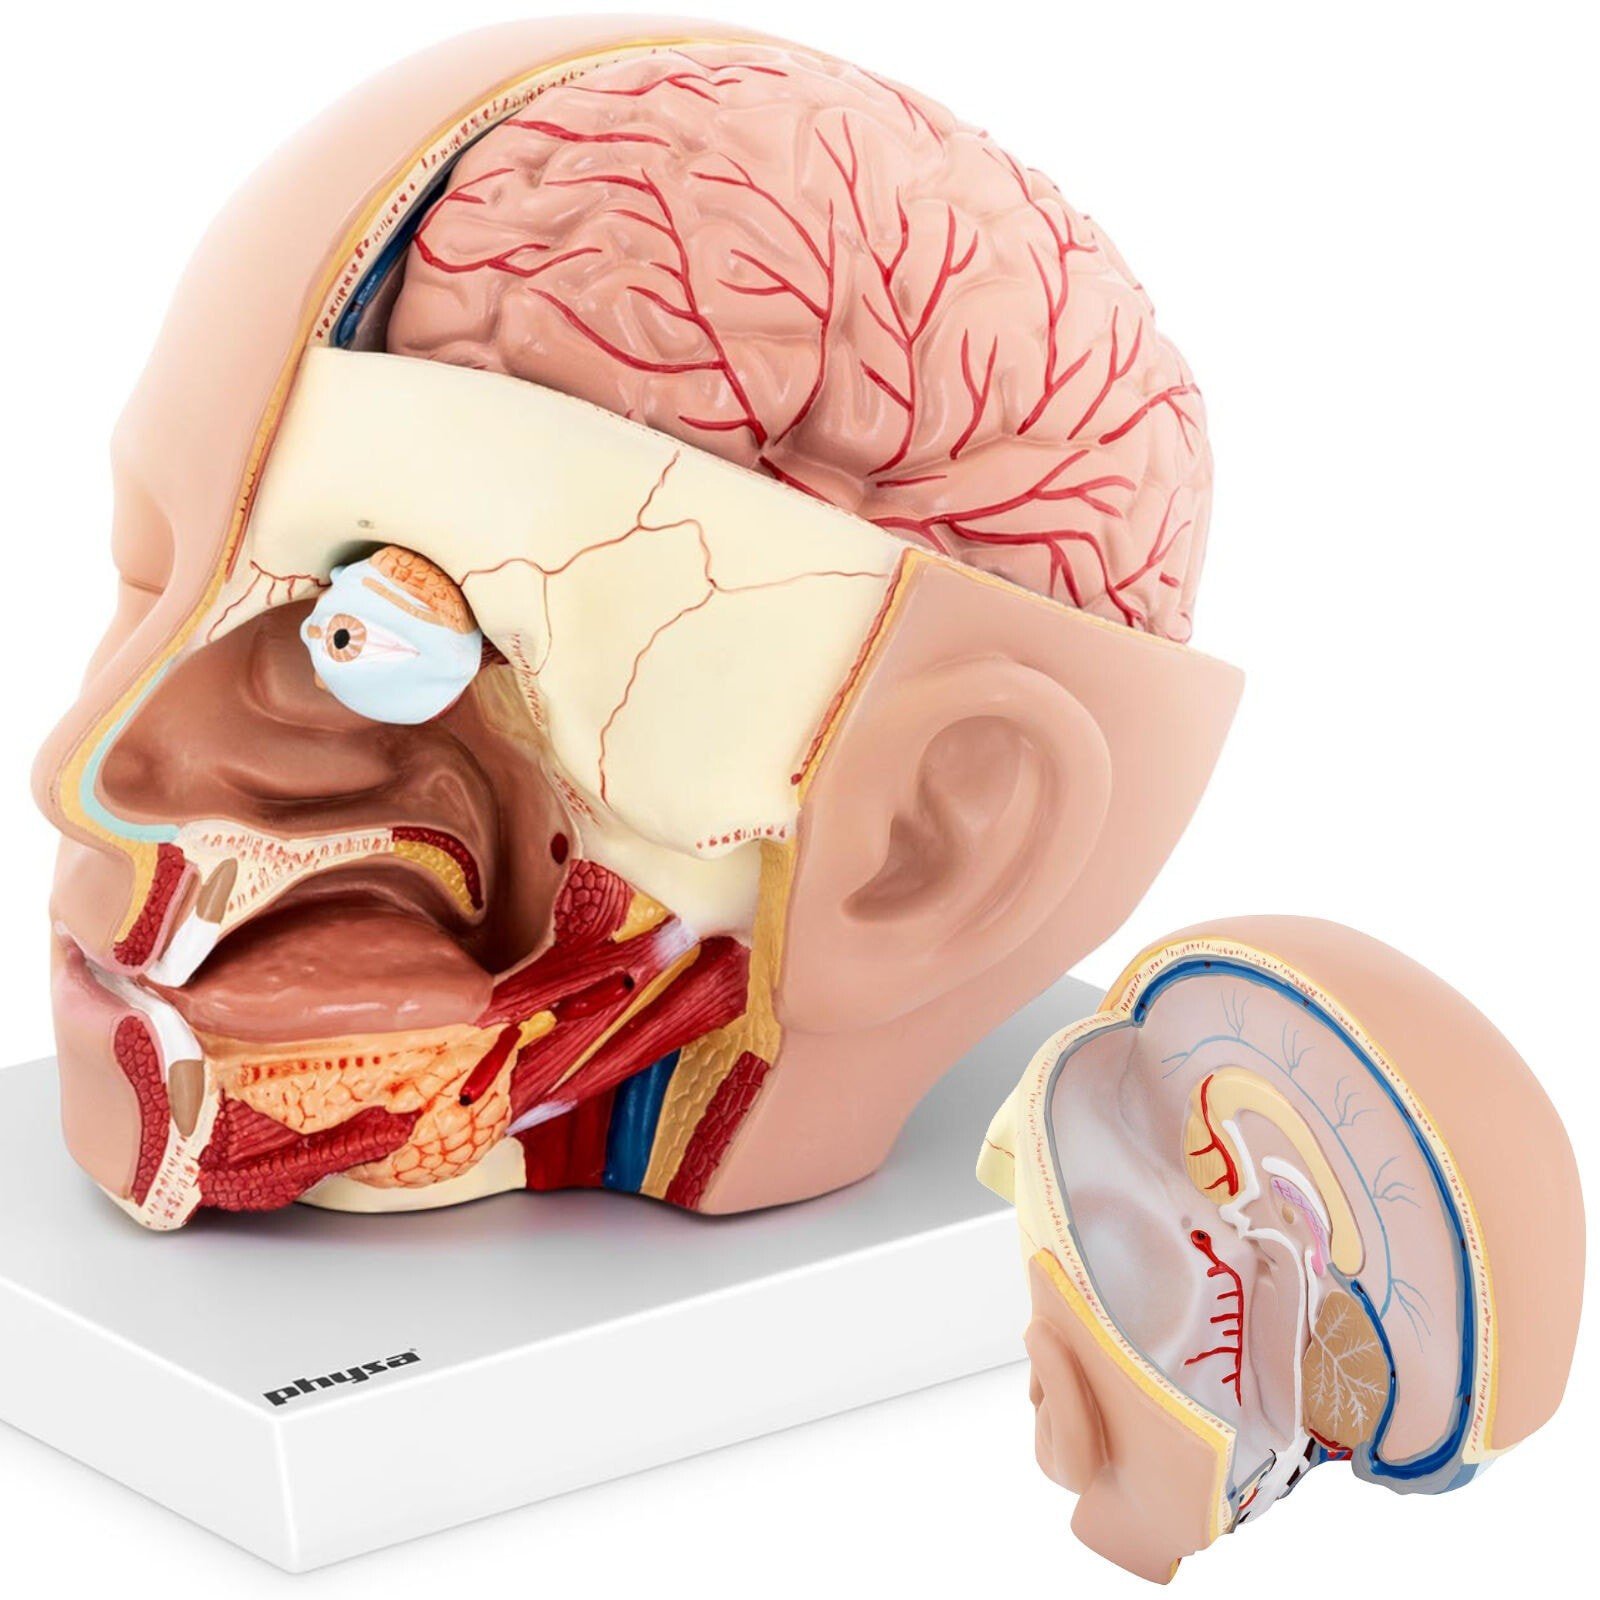 3D anatomical model of human head and brain scale 1: 1